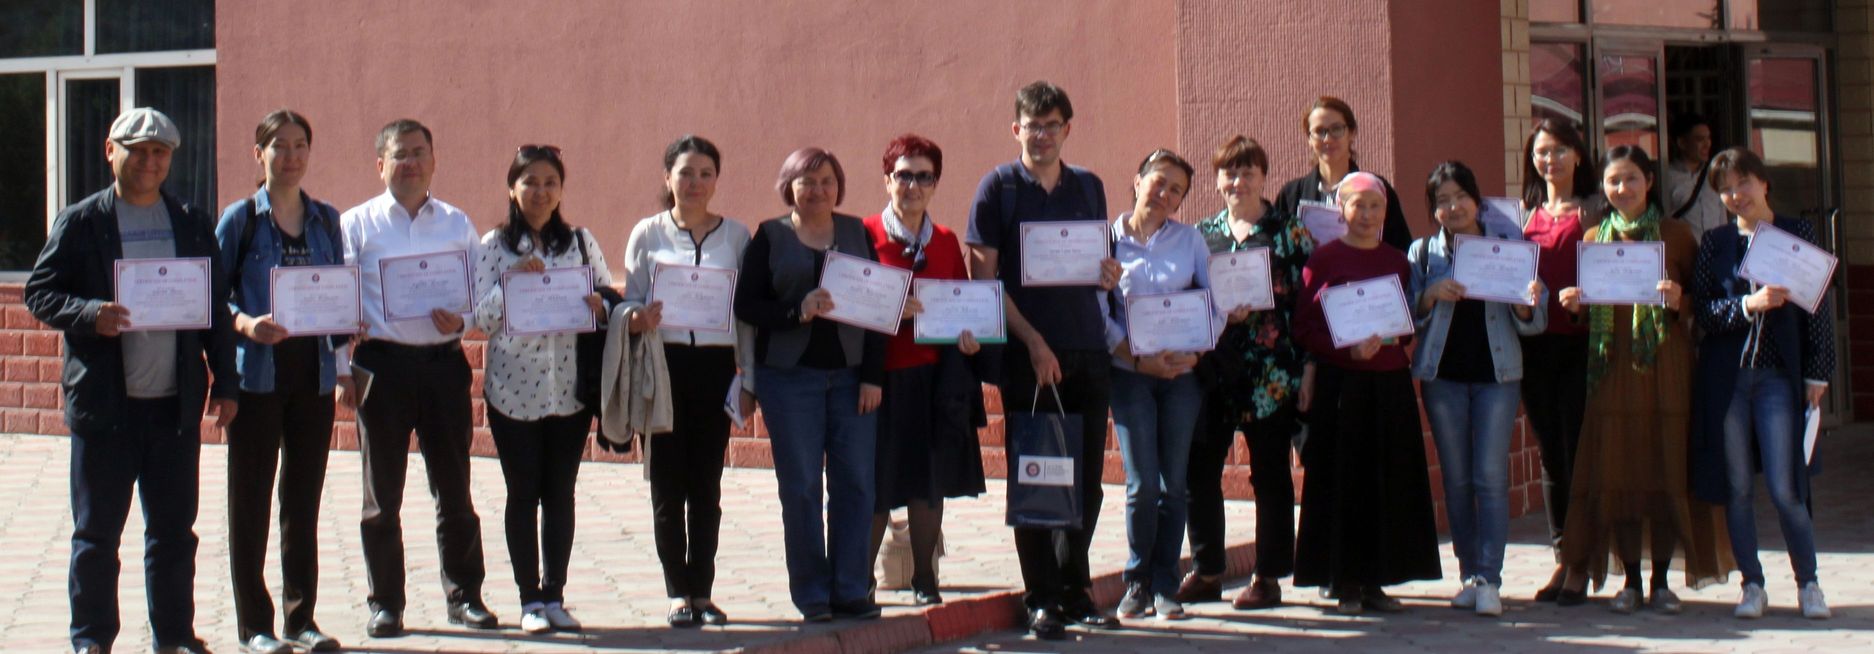 Students with diploma at the end of the seminar